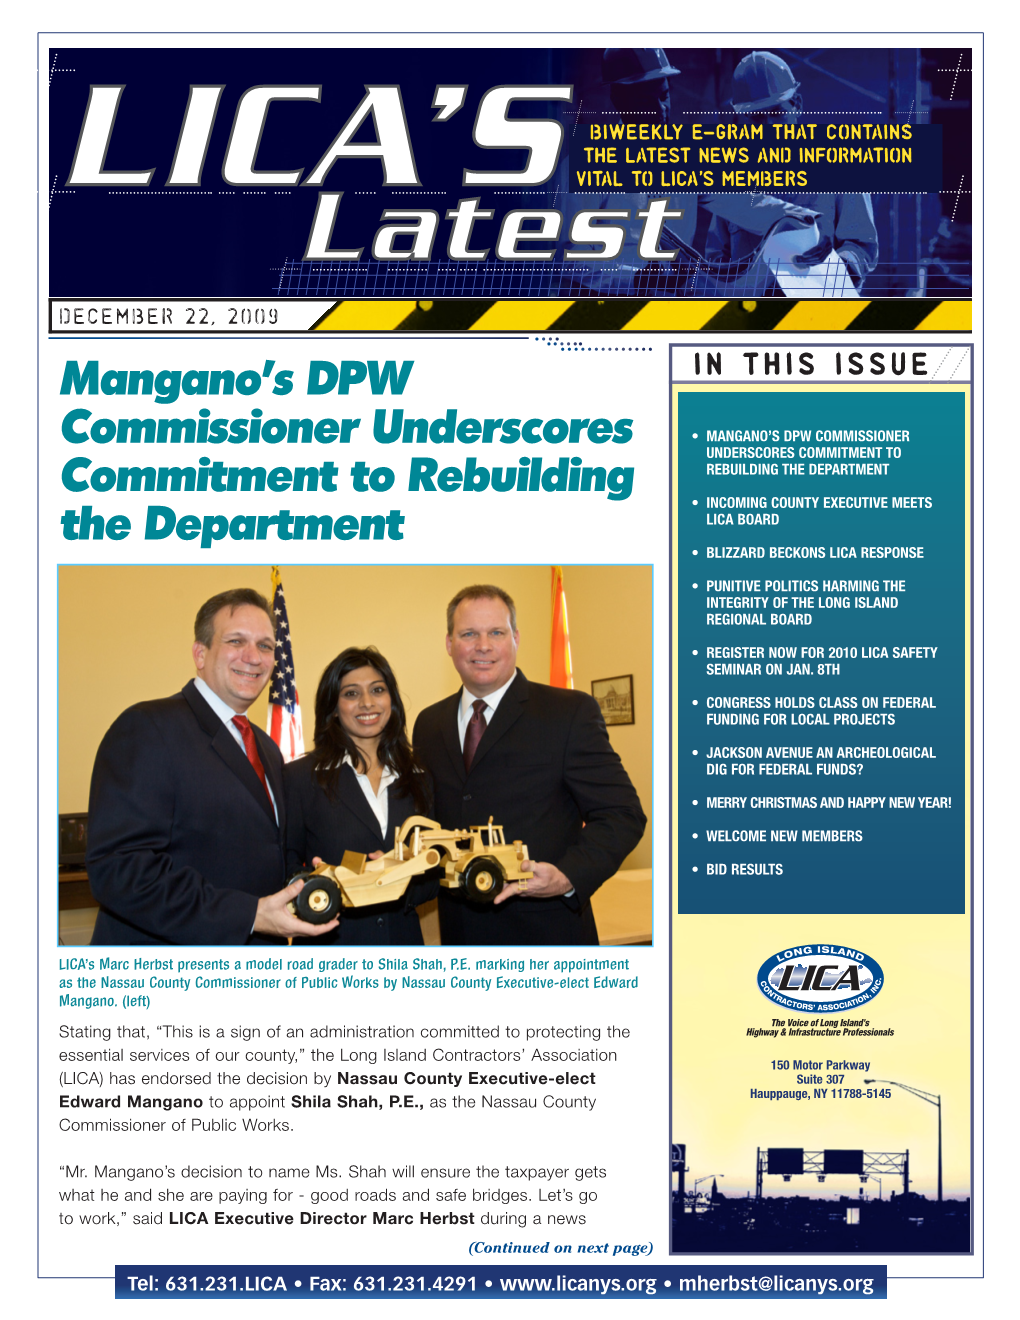 Mangano's DPW Commissioner Underscores Commitment to Rebuilding the Department